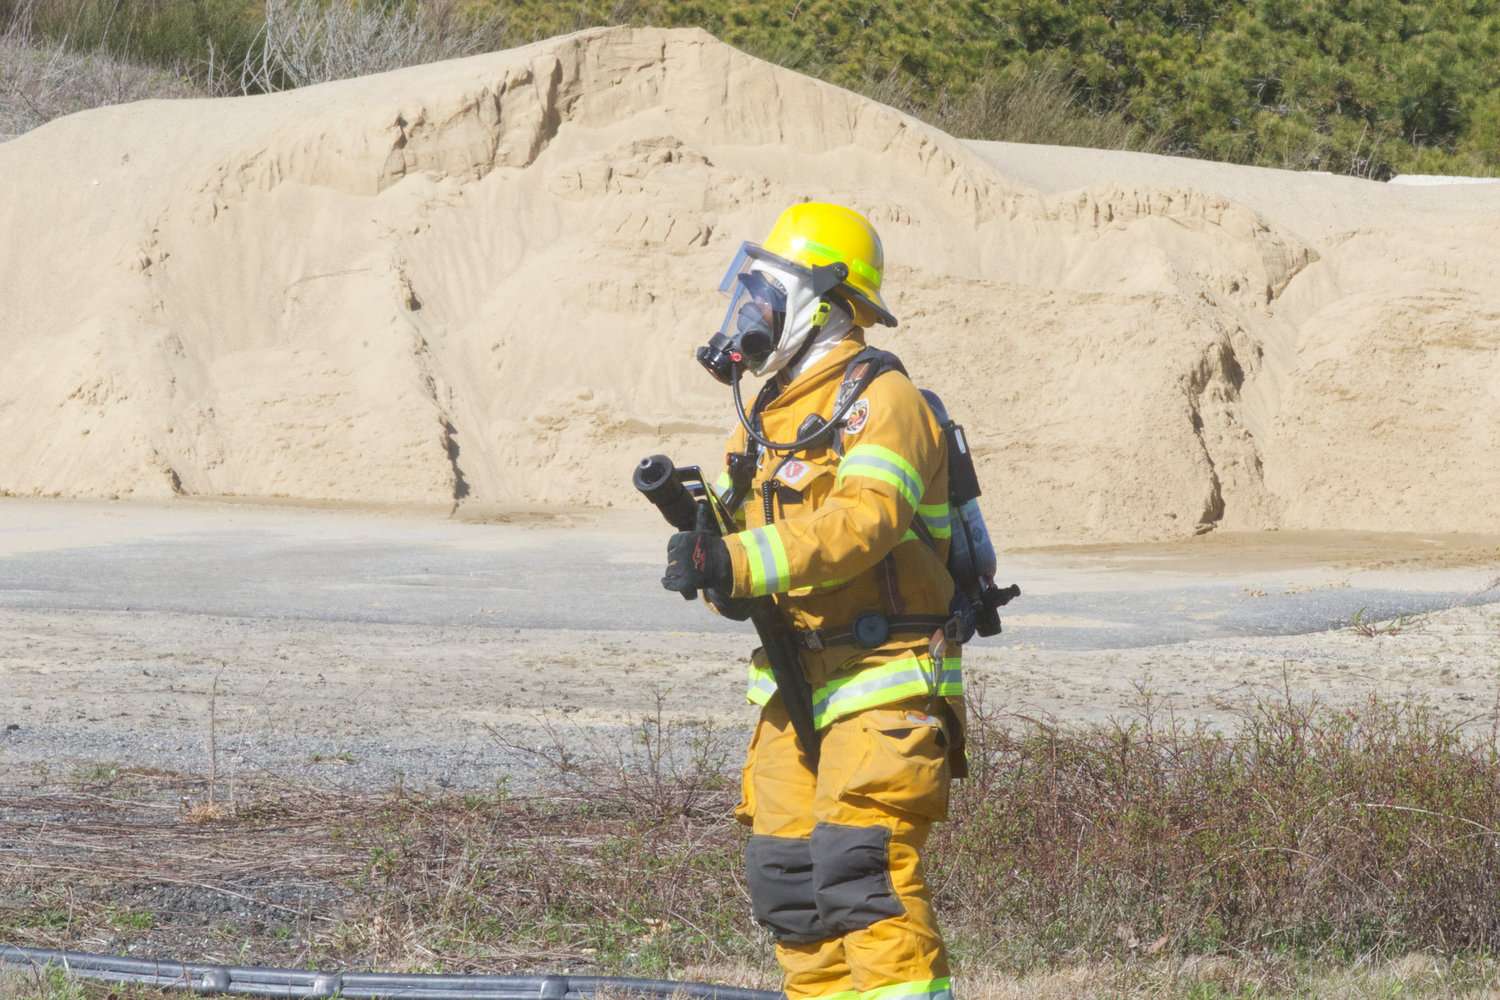 A Nantucket firefighter during an airport emergency response drill Monday.